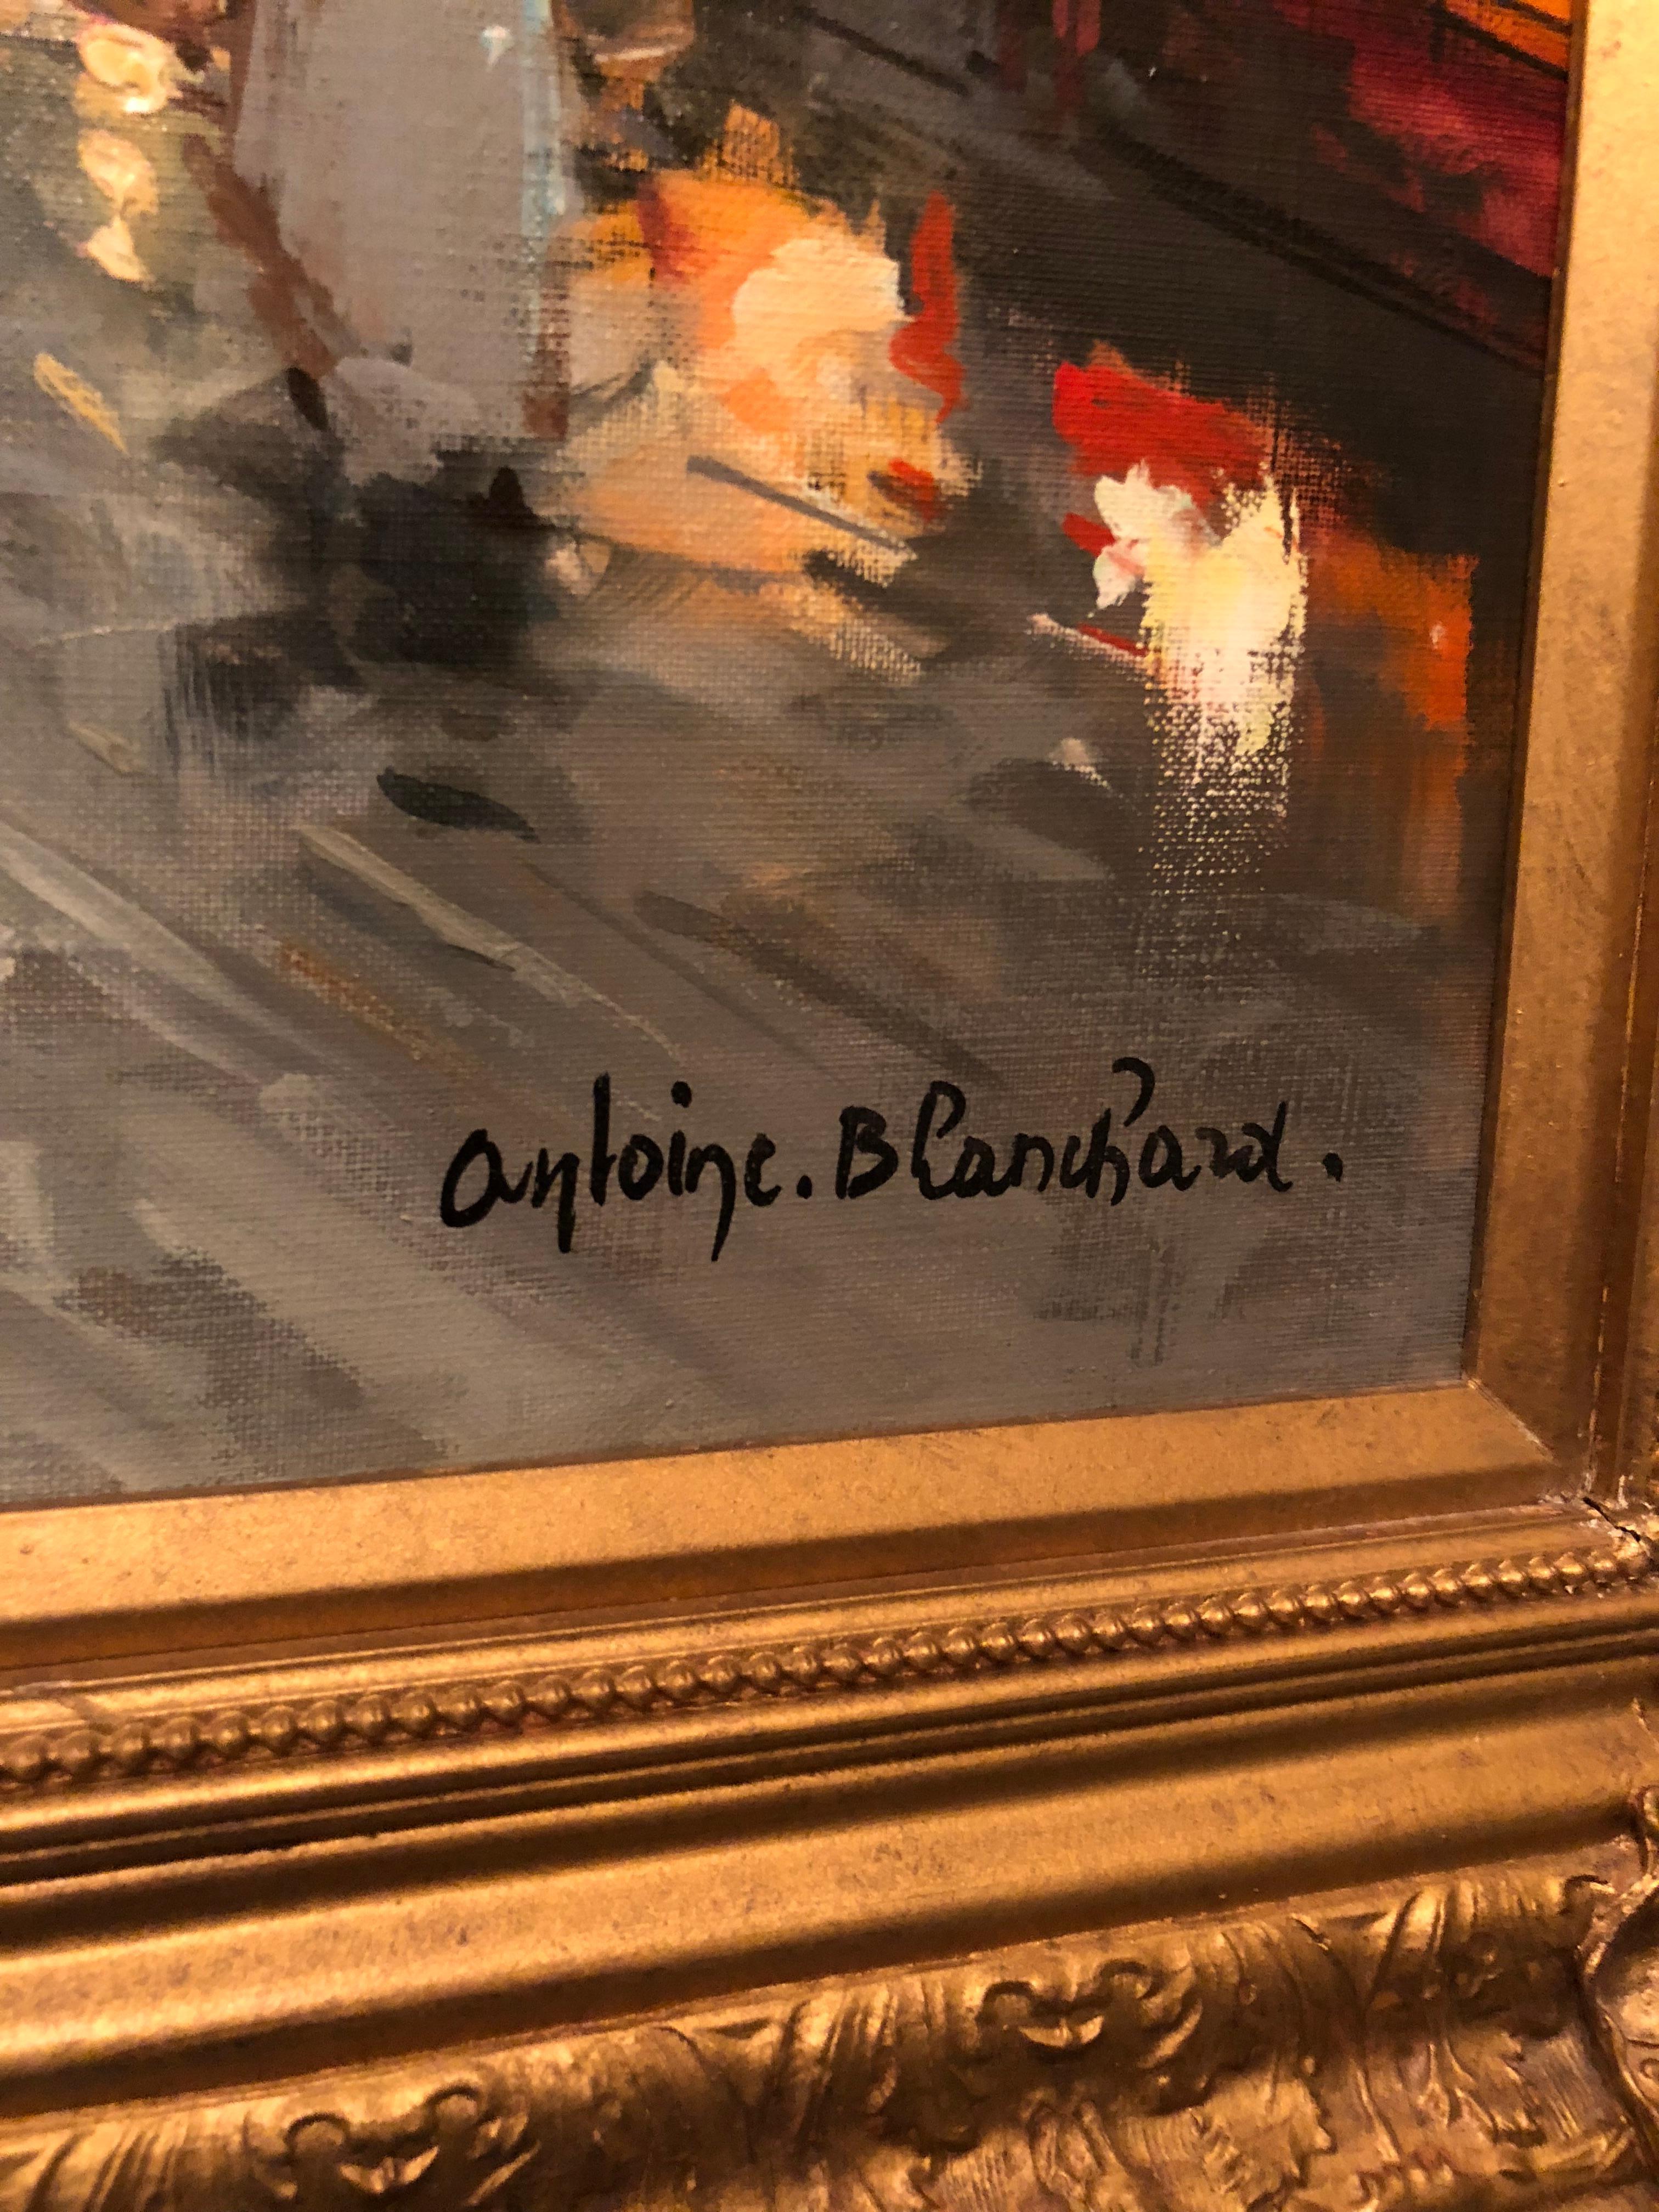 Signed lower right.
Antoine Blanchard was born in a village near Blois on the banks of the River Loire in 1910. His father had an important joinery business and was well-known in the area. Perhaps it was through watching his father carving wood and